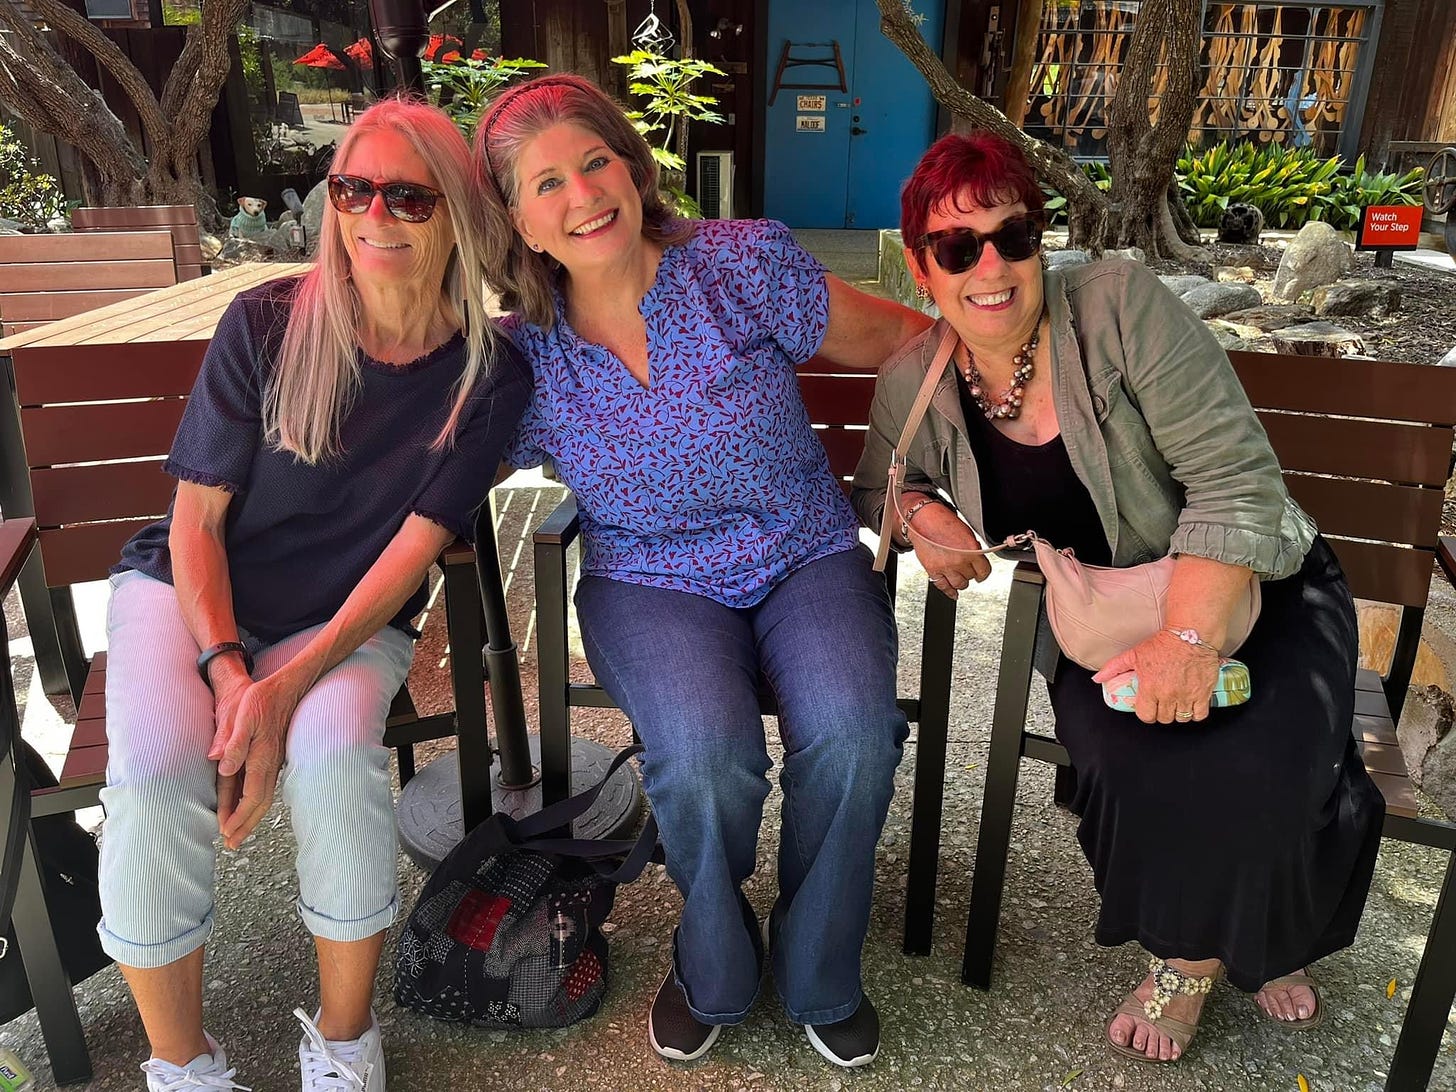 Three women sitting on wooden chairs outdoors and smiling for the camera.